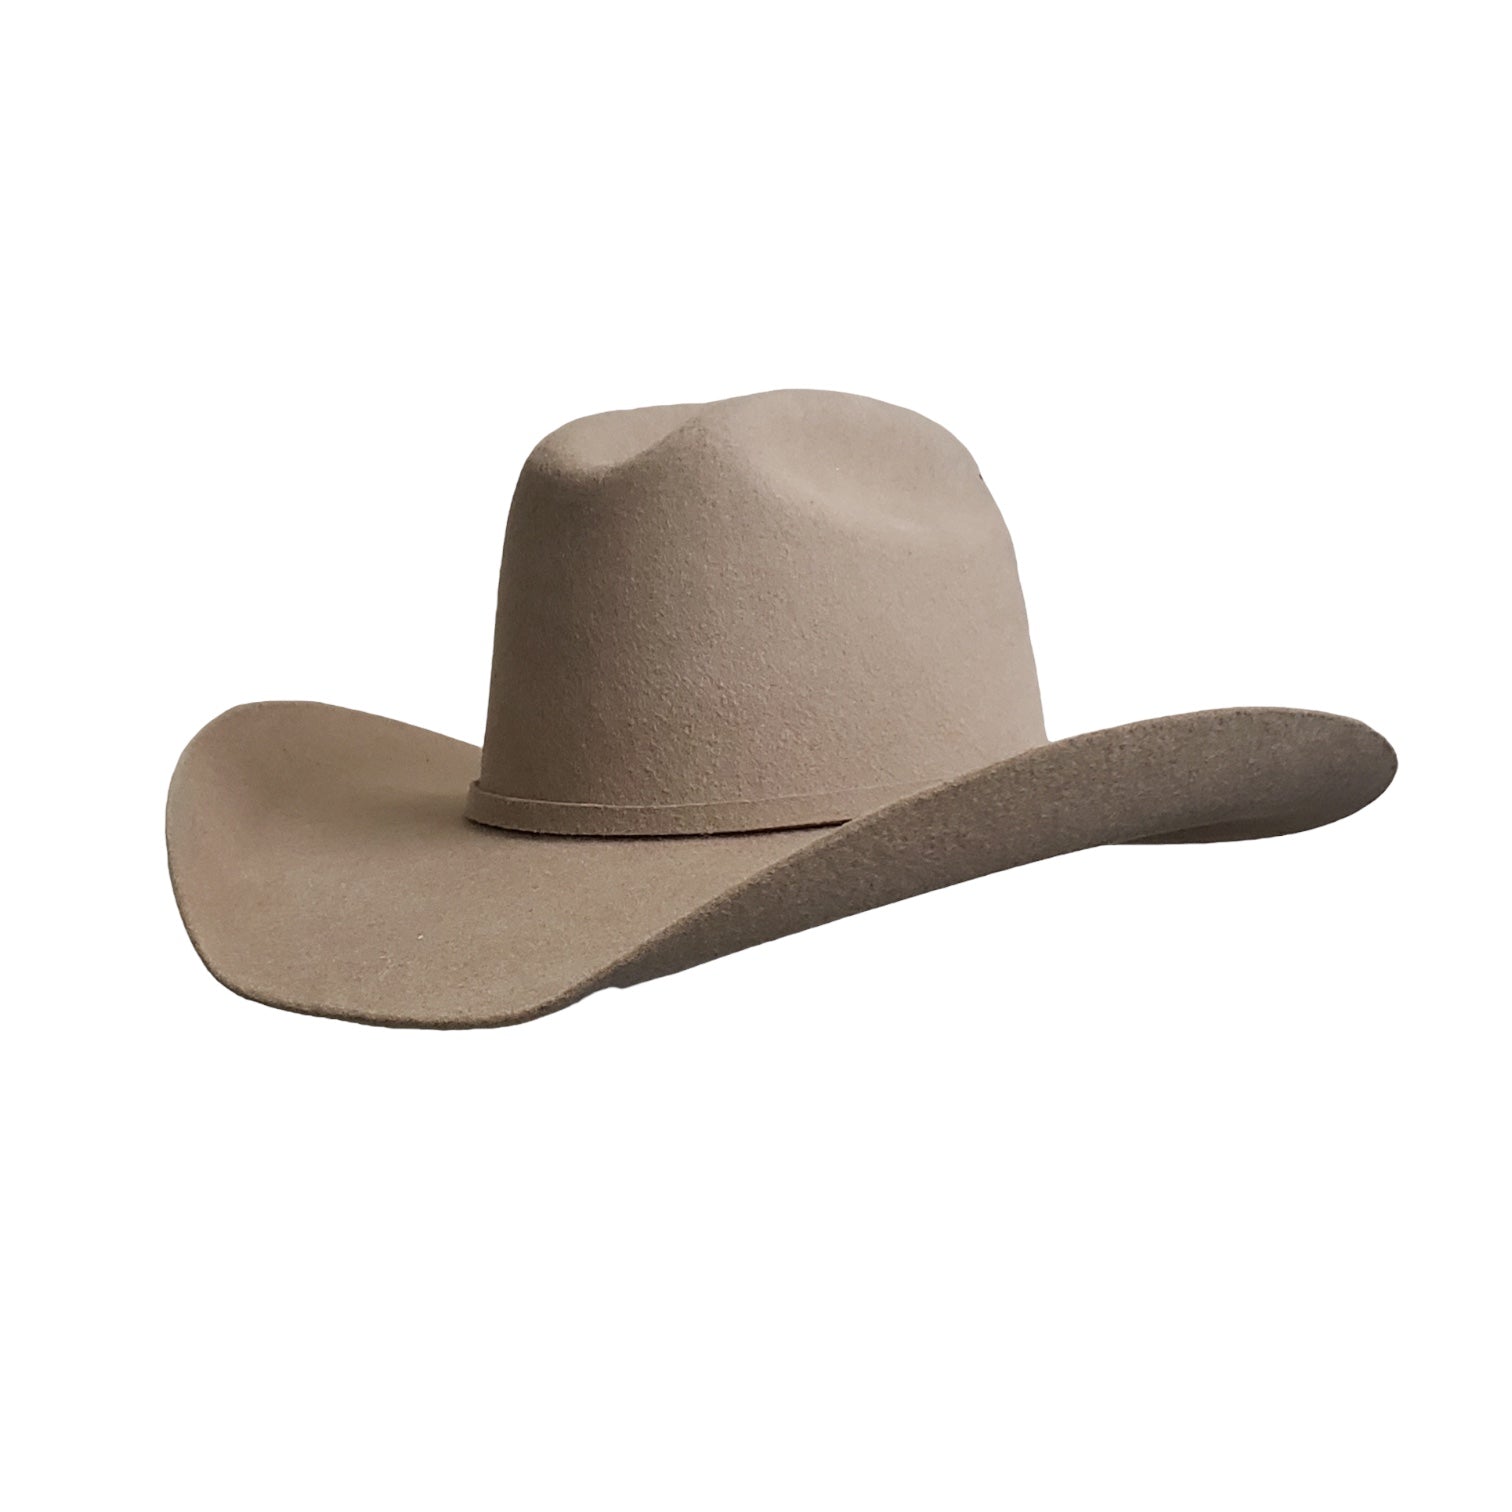 Gone Country Hats Men & Women's Hats 6-7/8 Yellowstone Chestnut - Wool Cashmere